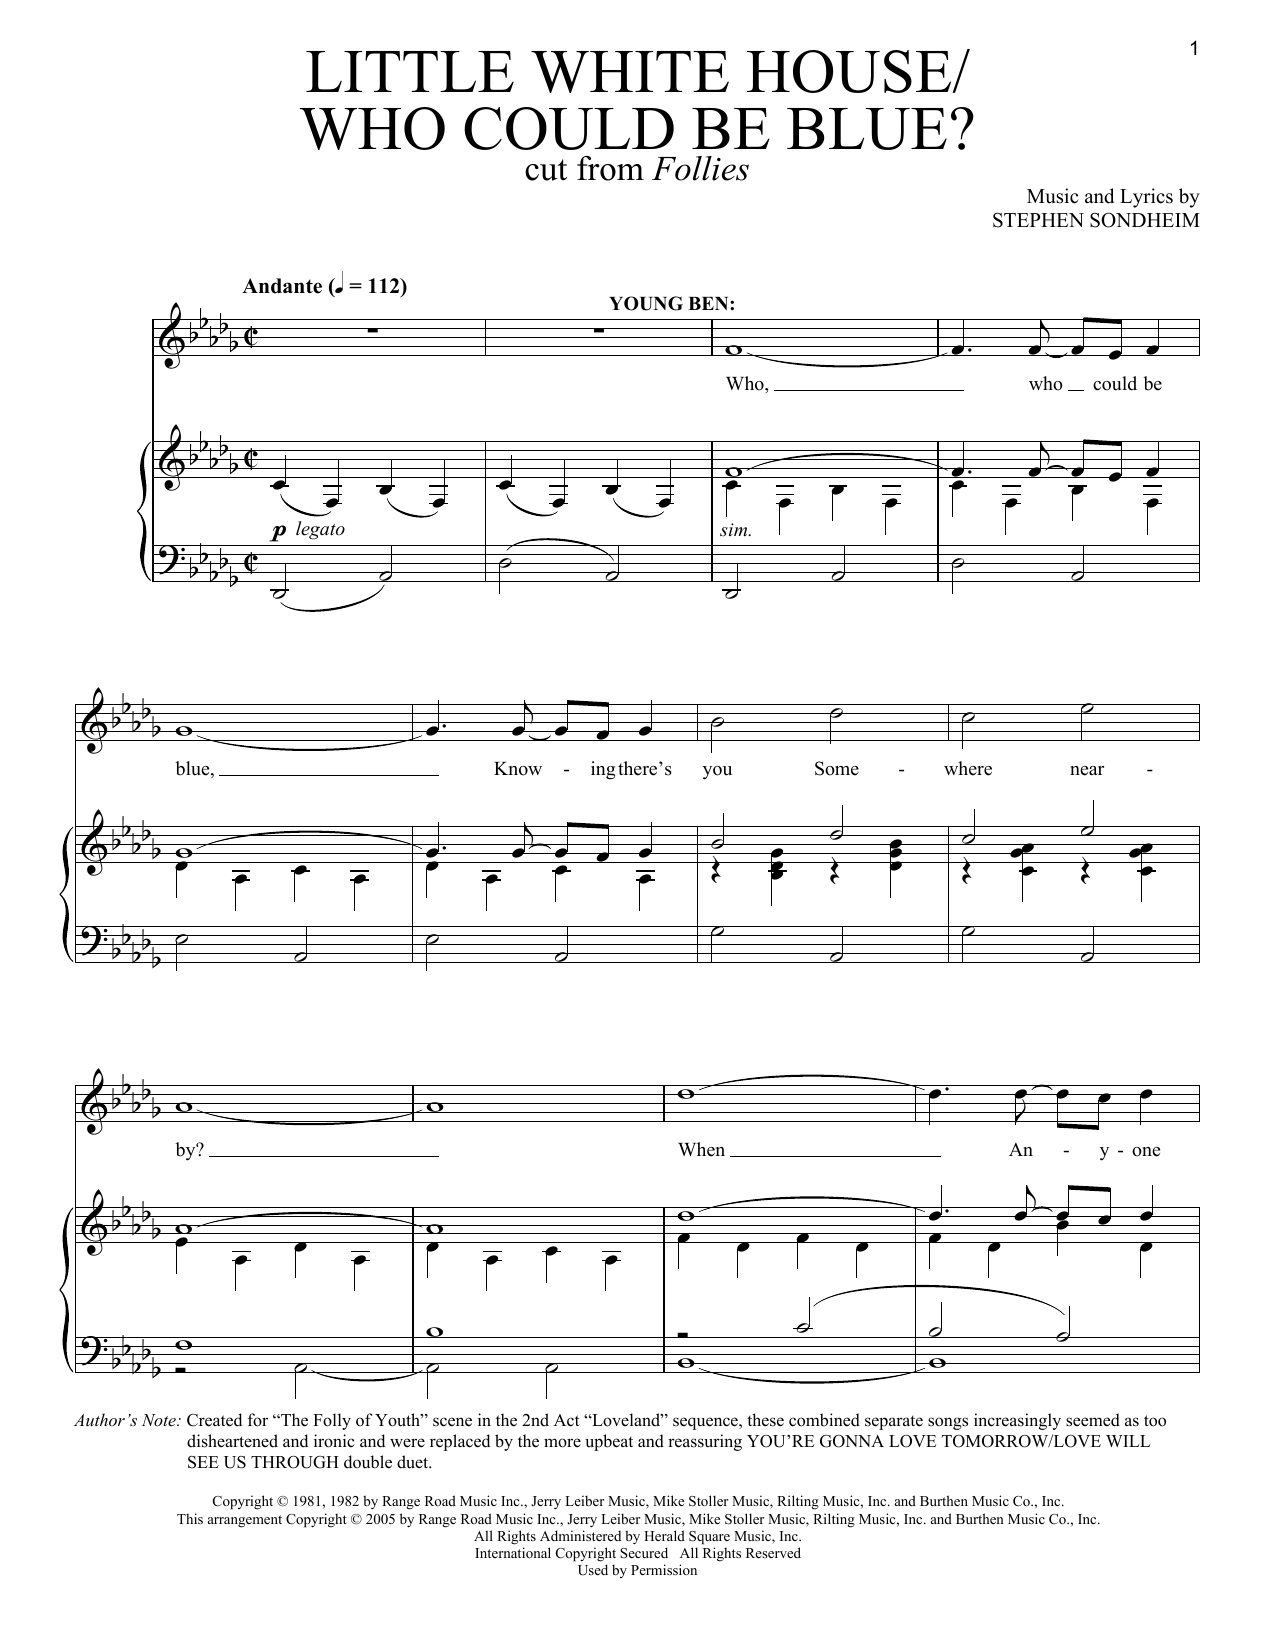 Download Stephen Sondheim Little White House/Who Could Be Blue? Sheet Music